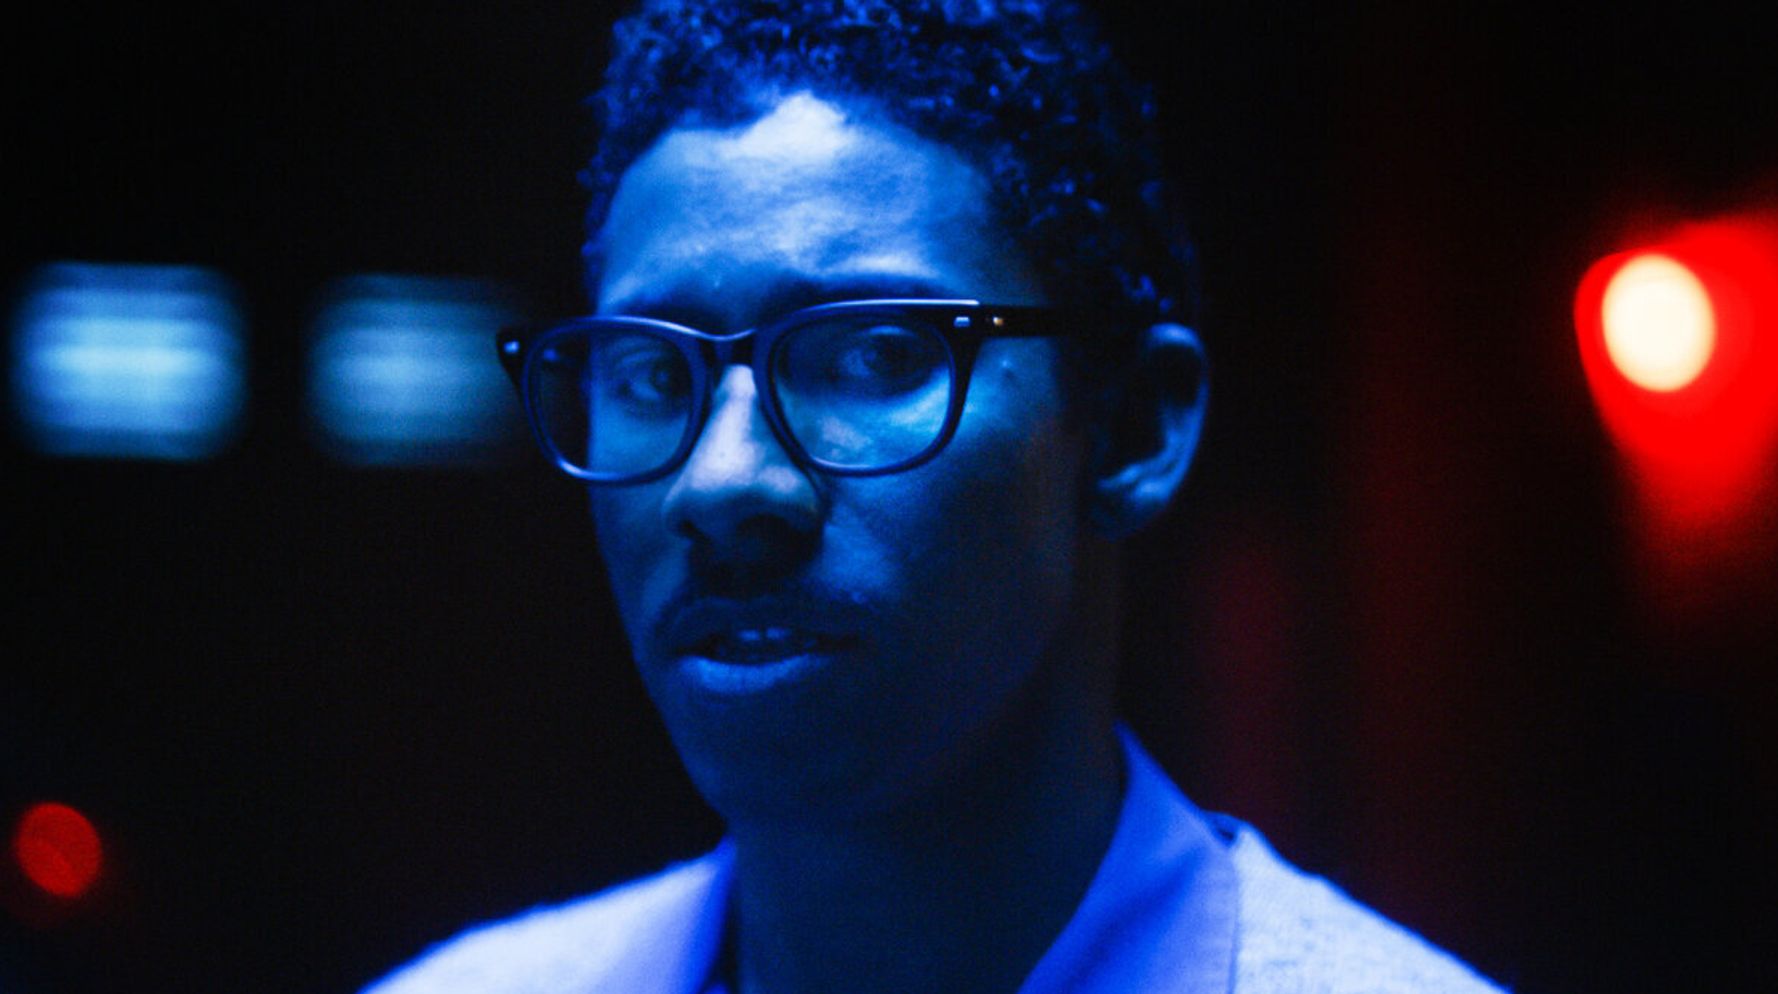 Keiynan Lonsdale Channels LGBTQ Rights Icon Bayard Rustin In HBO Max’s ‘Equal’